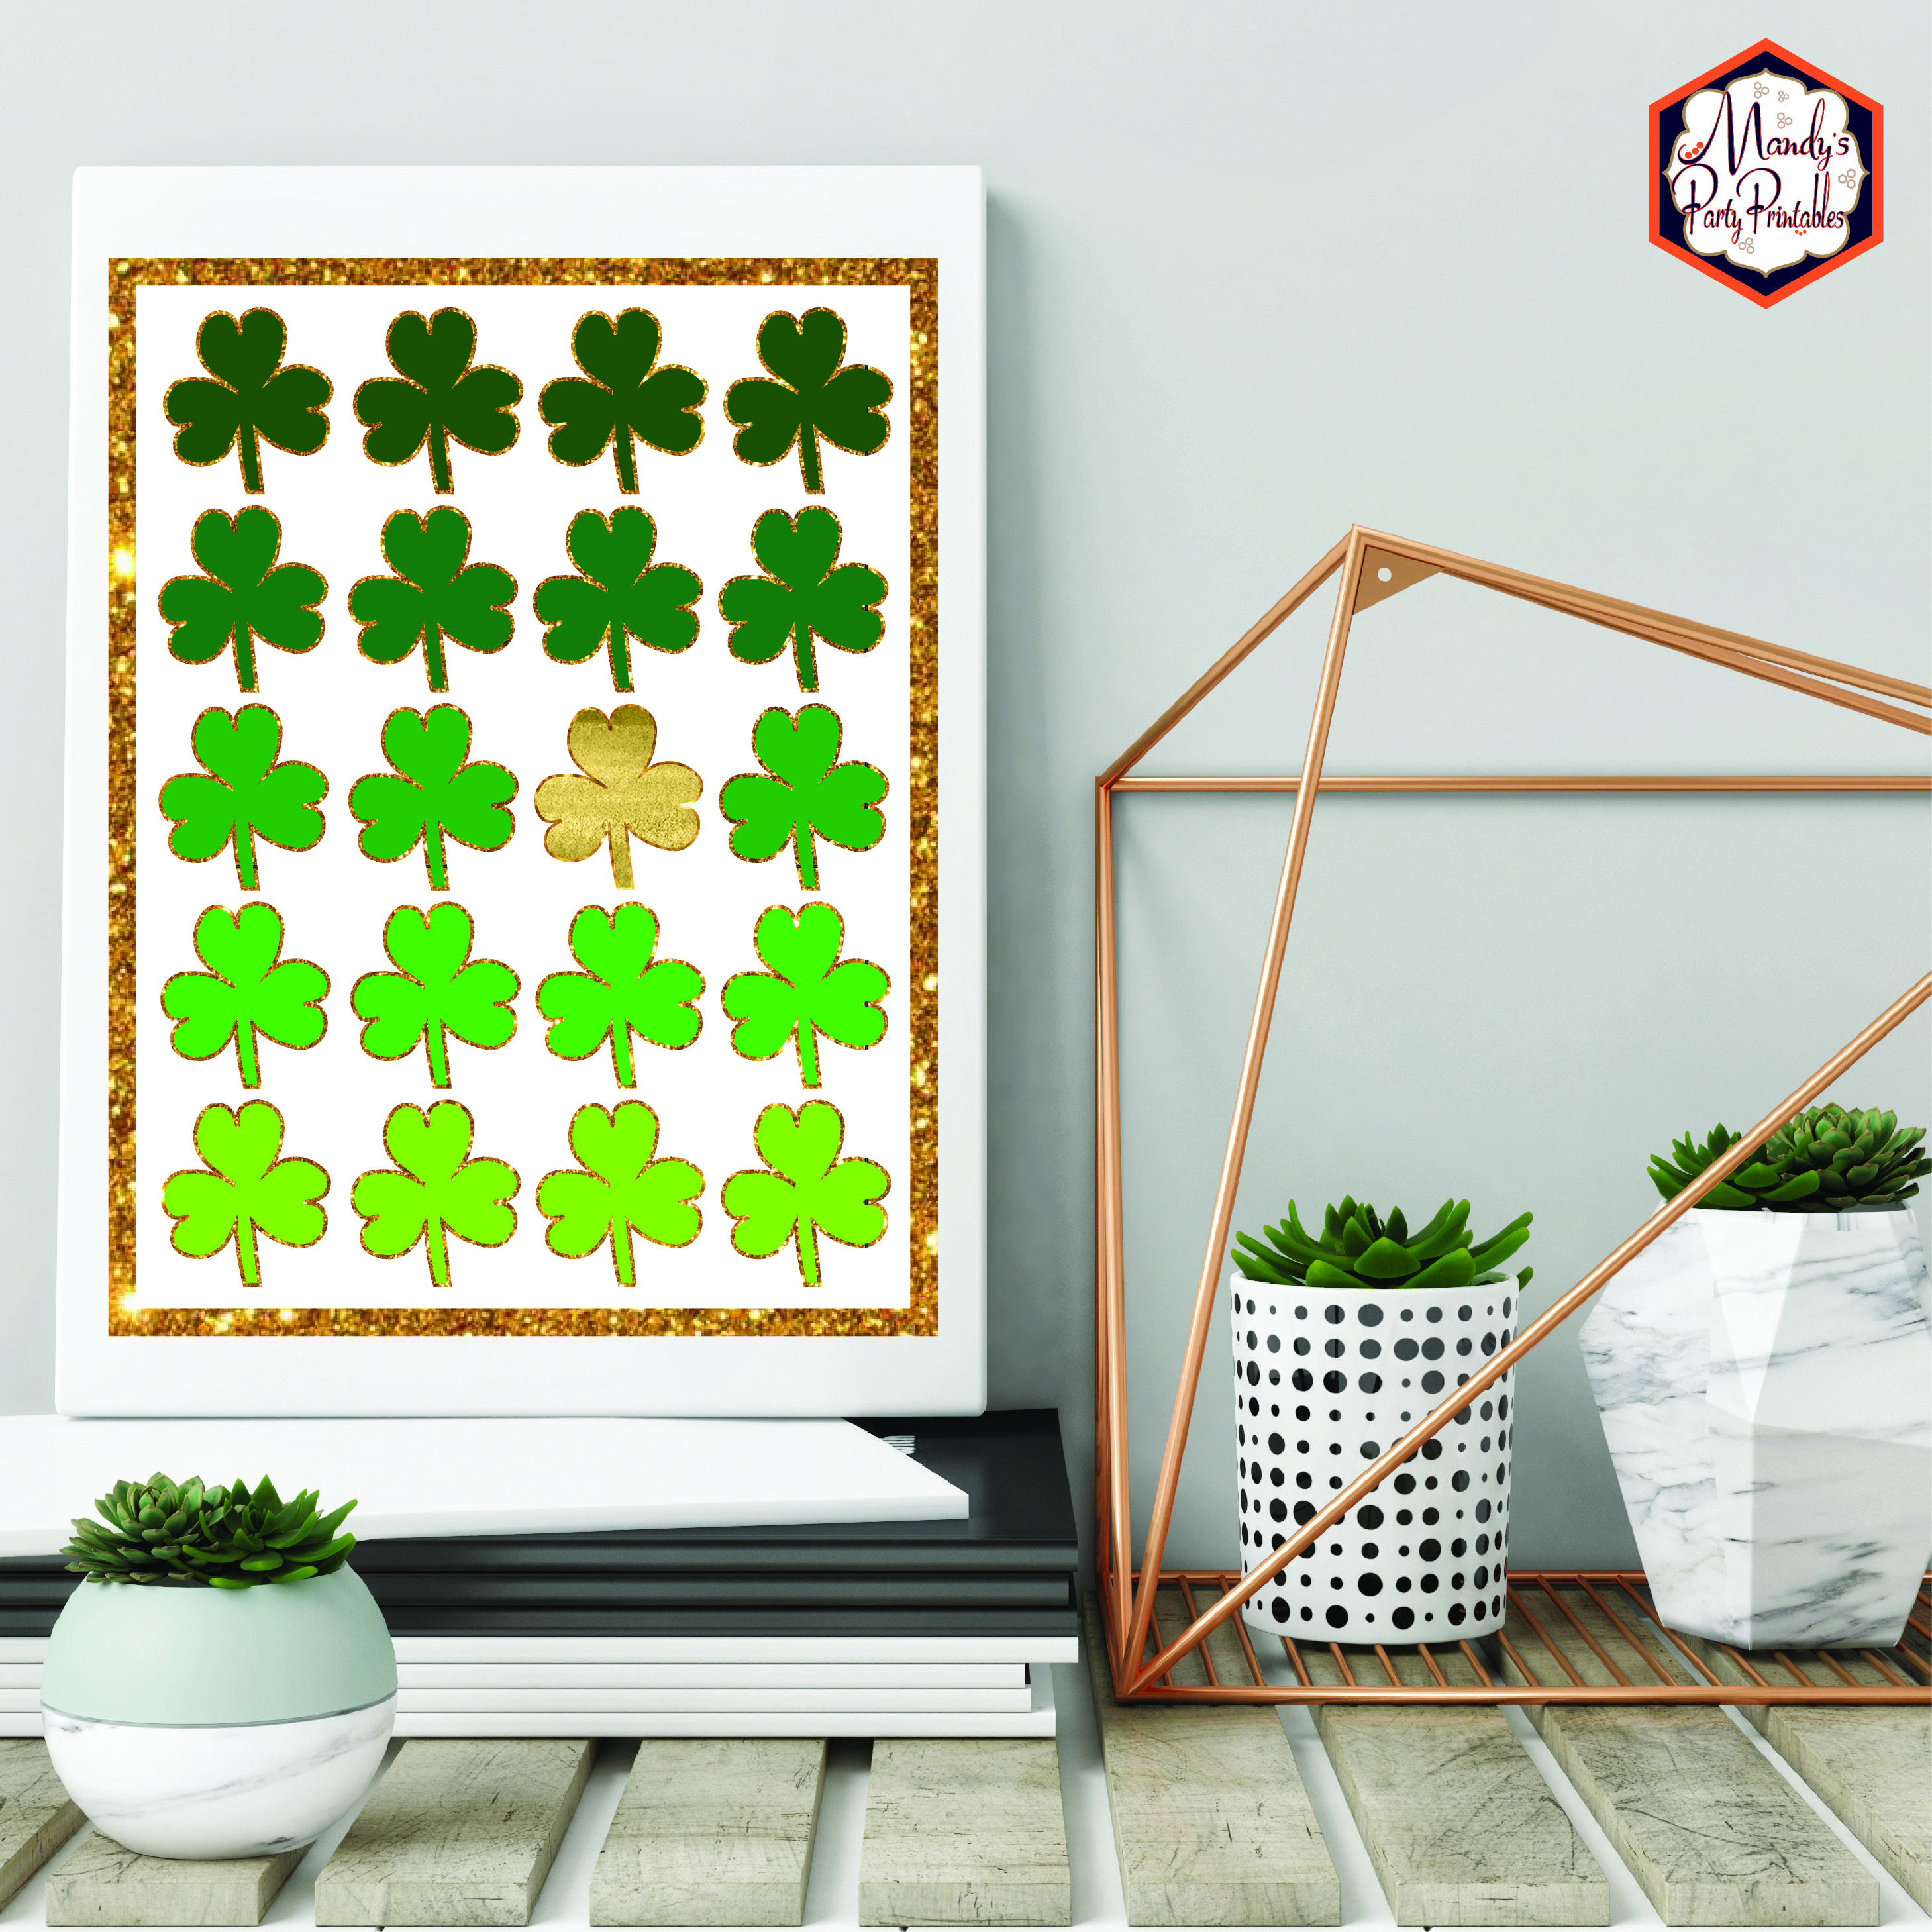 gold sparkly bordered shamrock 8x10 free printable sign on a desk with succulents flanking | Mandy's Party Printables